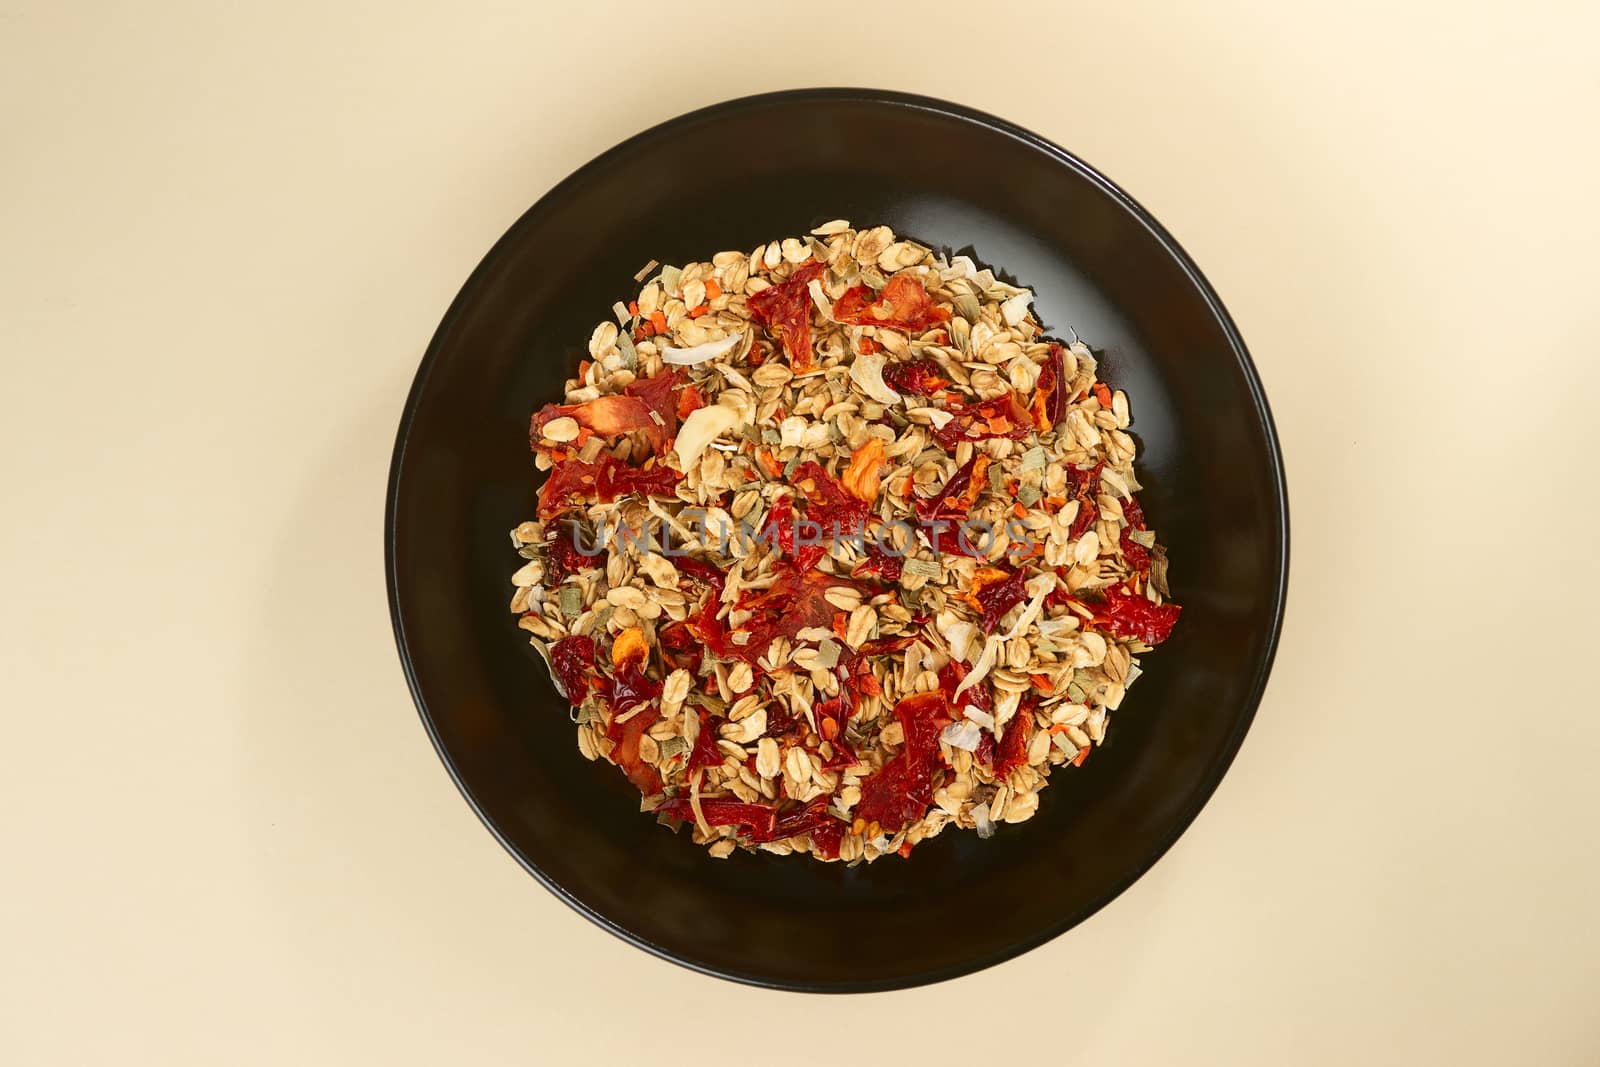 A tasty salt granola with pepper in black bowl on baige bakground. Concept of nutrient and healty breakfast or meal and vegan or vegetarian food.